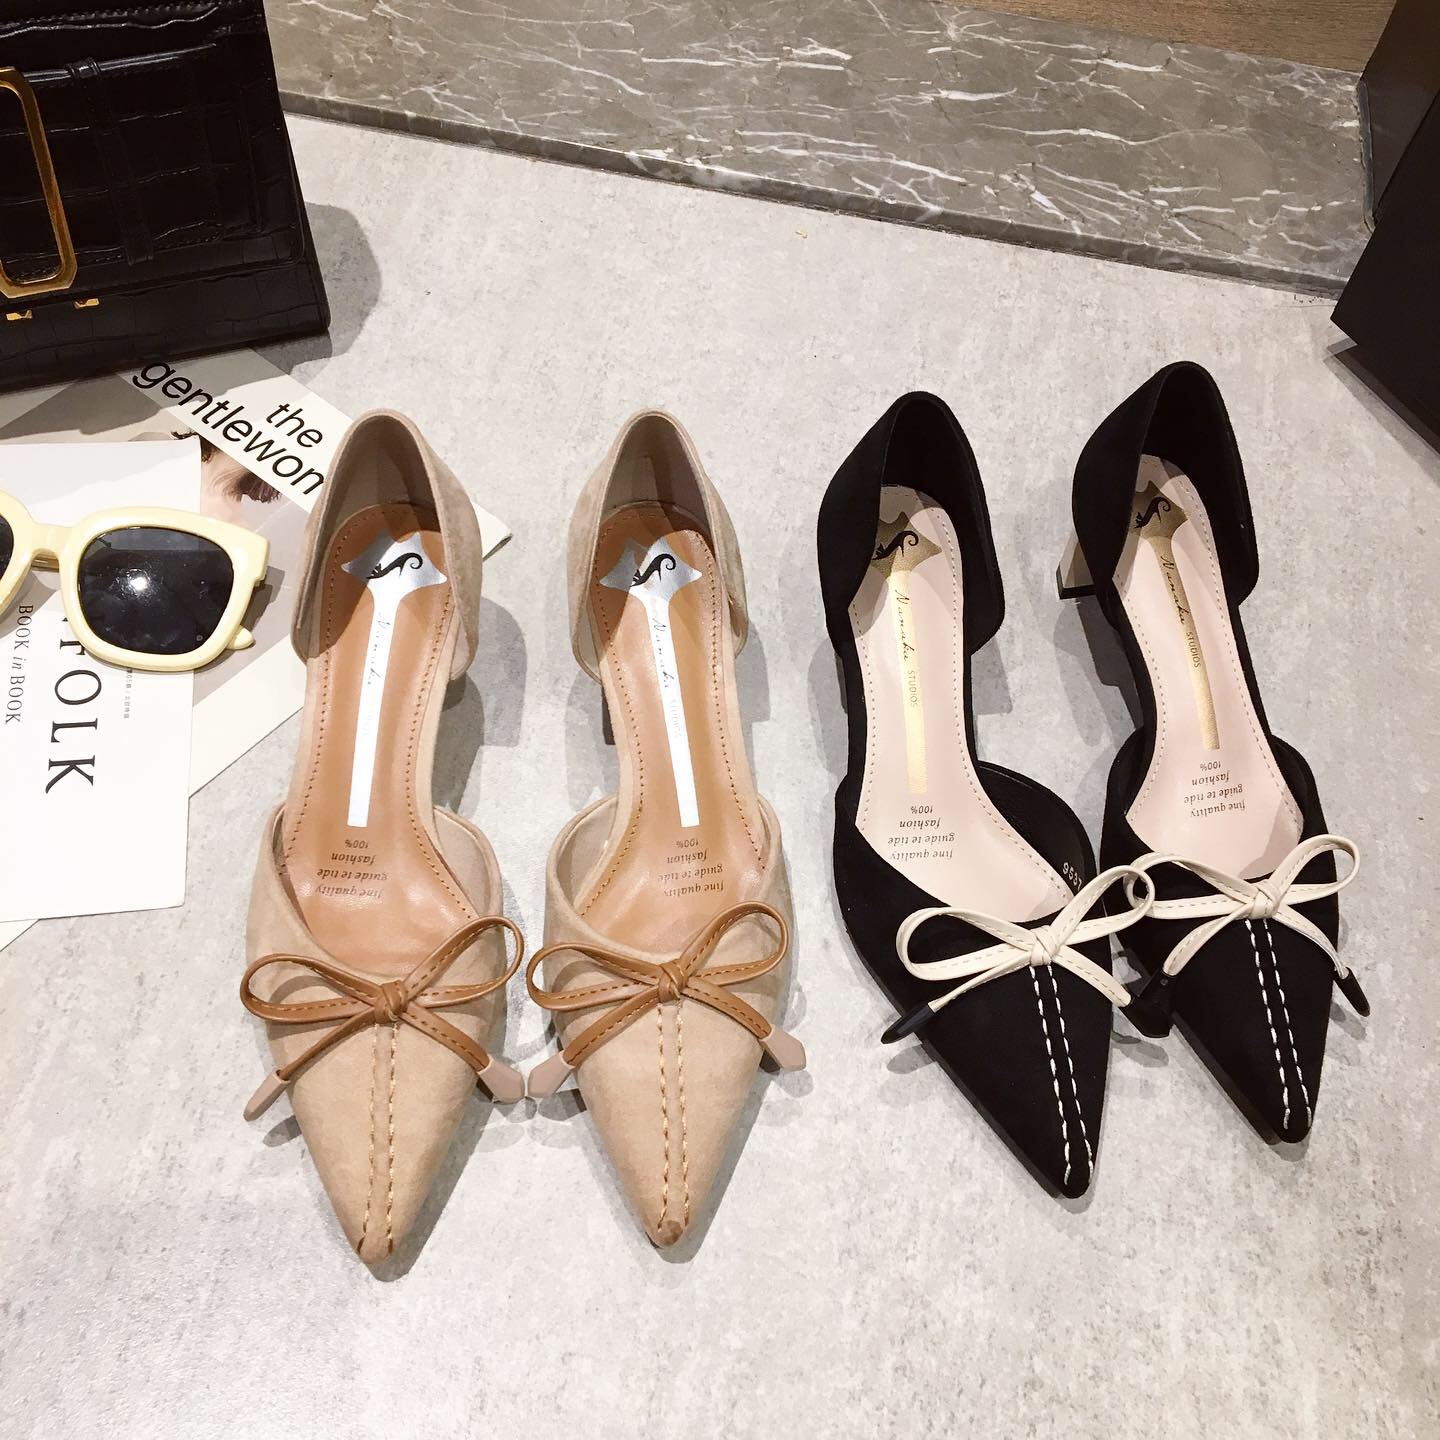 2019 New fashion versatile pointy shoes women's bow shoes #95019